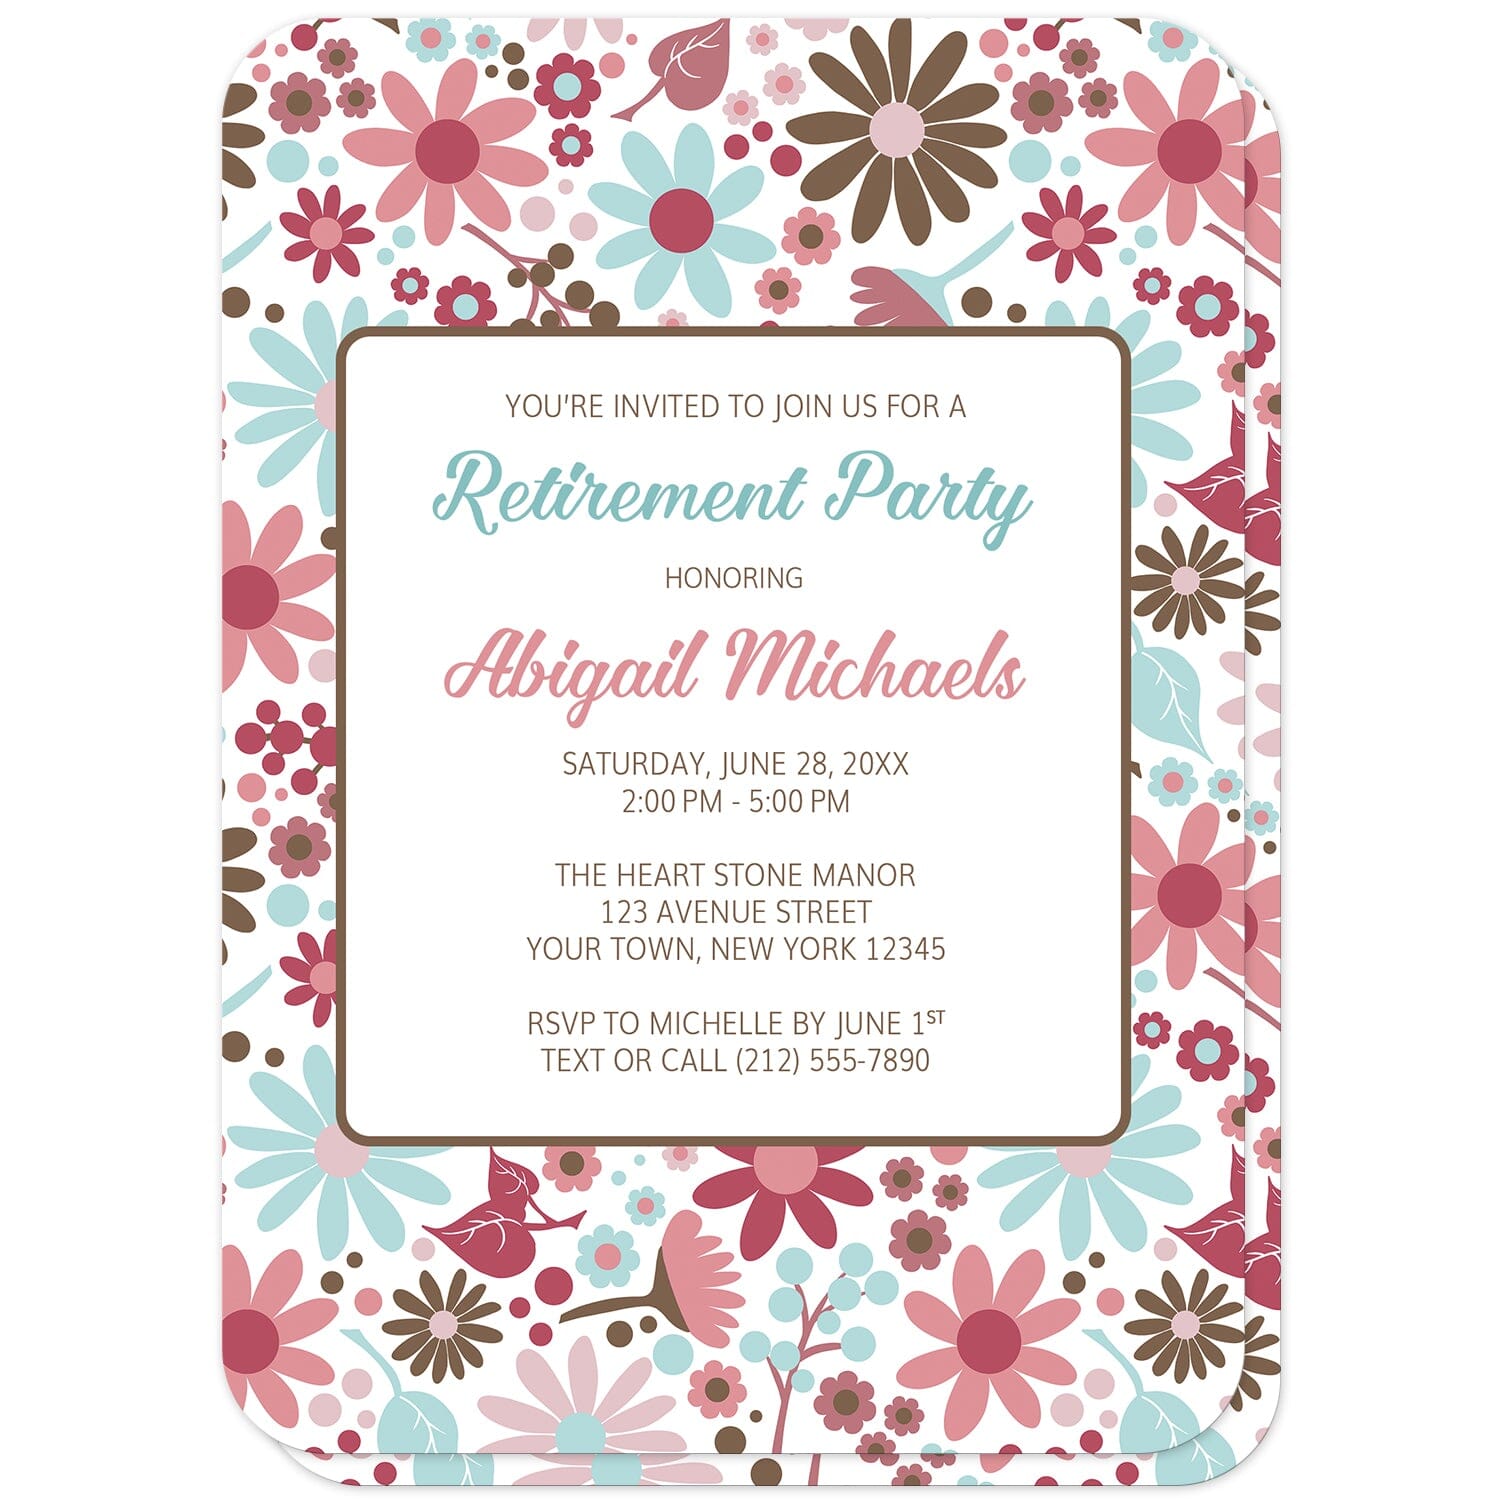 Berry Blue Summer Flowers Retirement Party Invitations (with rounded corners) at Artistically Invited. Beautiful berry blue summer flowers retirement party invitations designed with a pretty summer floral pattern in different hues of berry pink with blue and brown. Your personalizes retirement party details are custom printed in blue, pink, and brown over white in the center area of the invitations. 